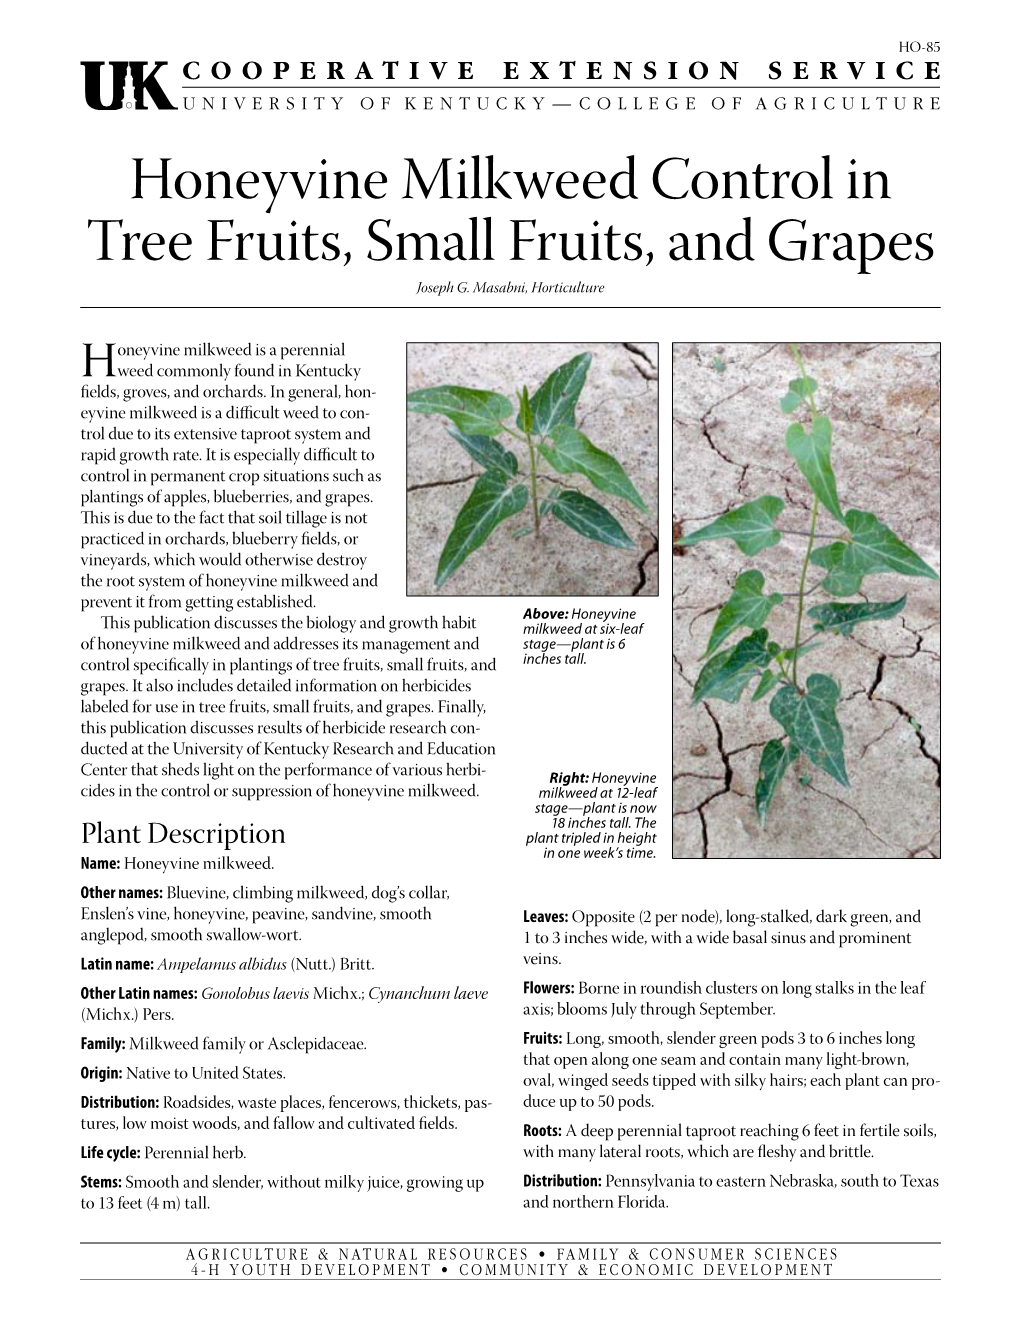 Honeyvine Milkweed Control in Tree Fruits, Small Fruits, and Grapes Joseph G